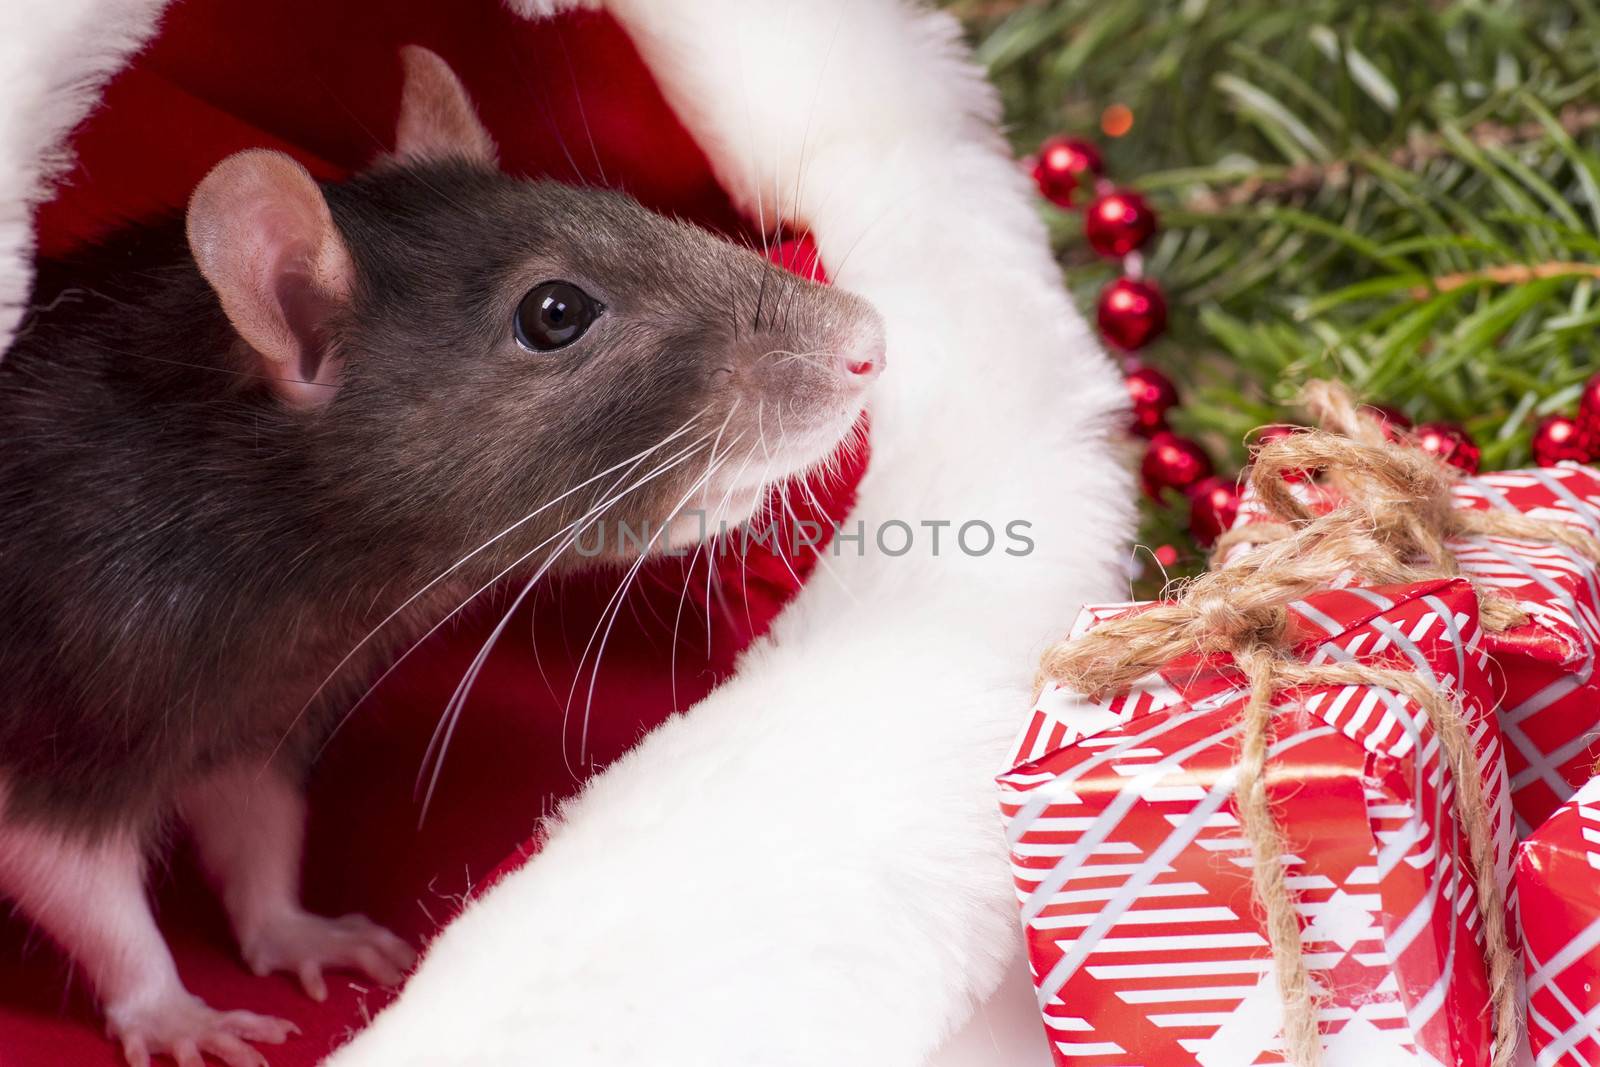 Christmas grey and white rat - a symbol of the new year 2020 sits and hides in the red hat of Santa Claus